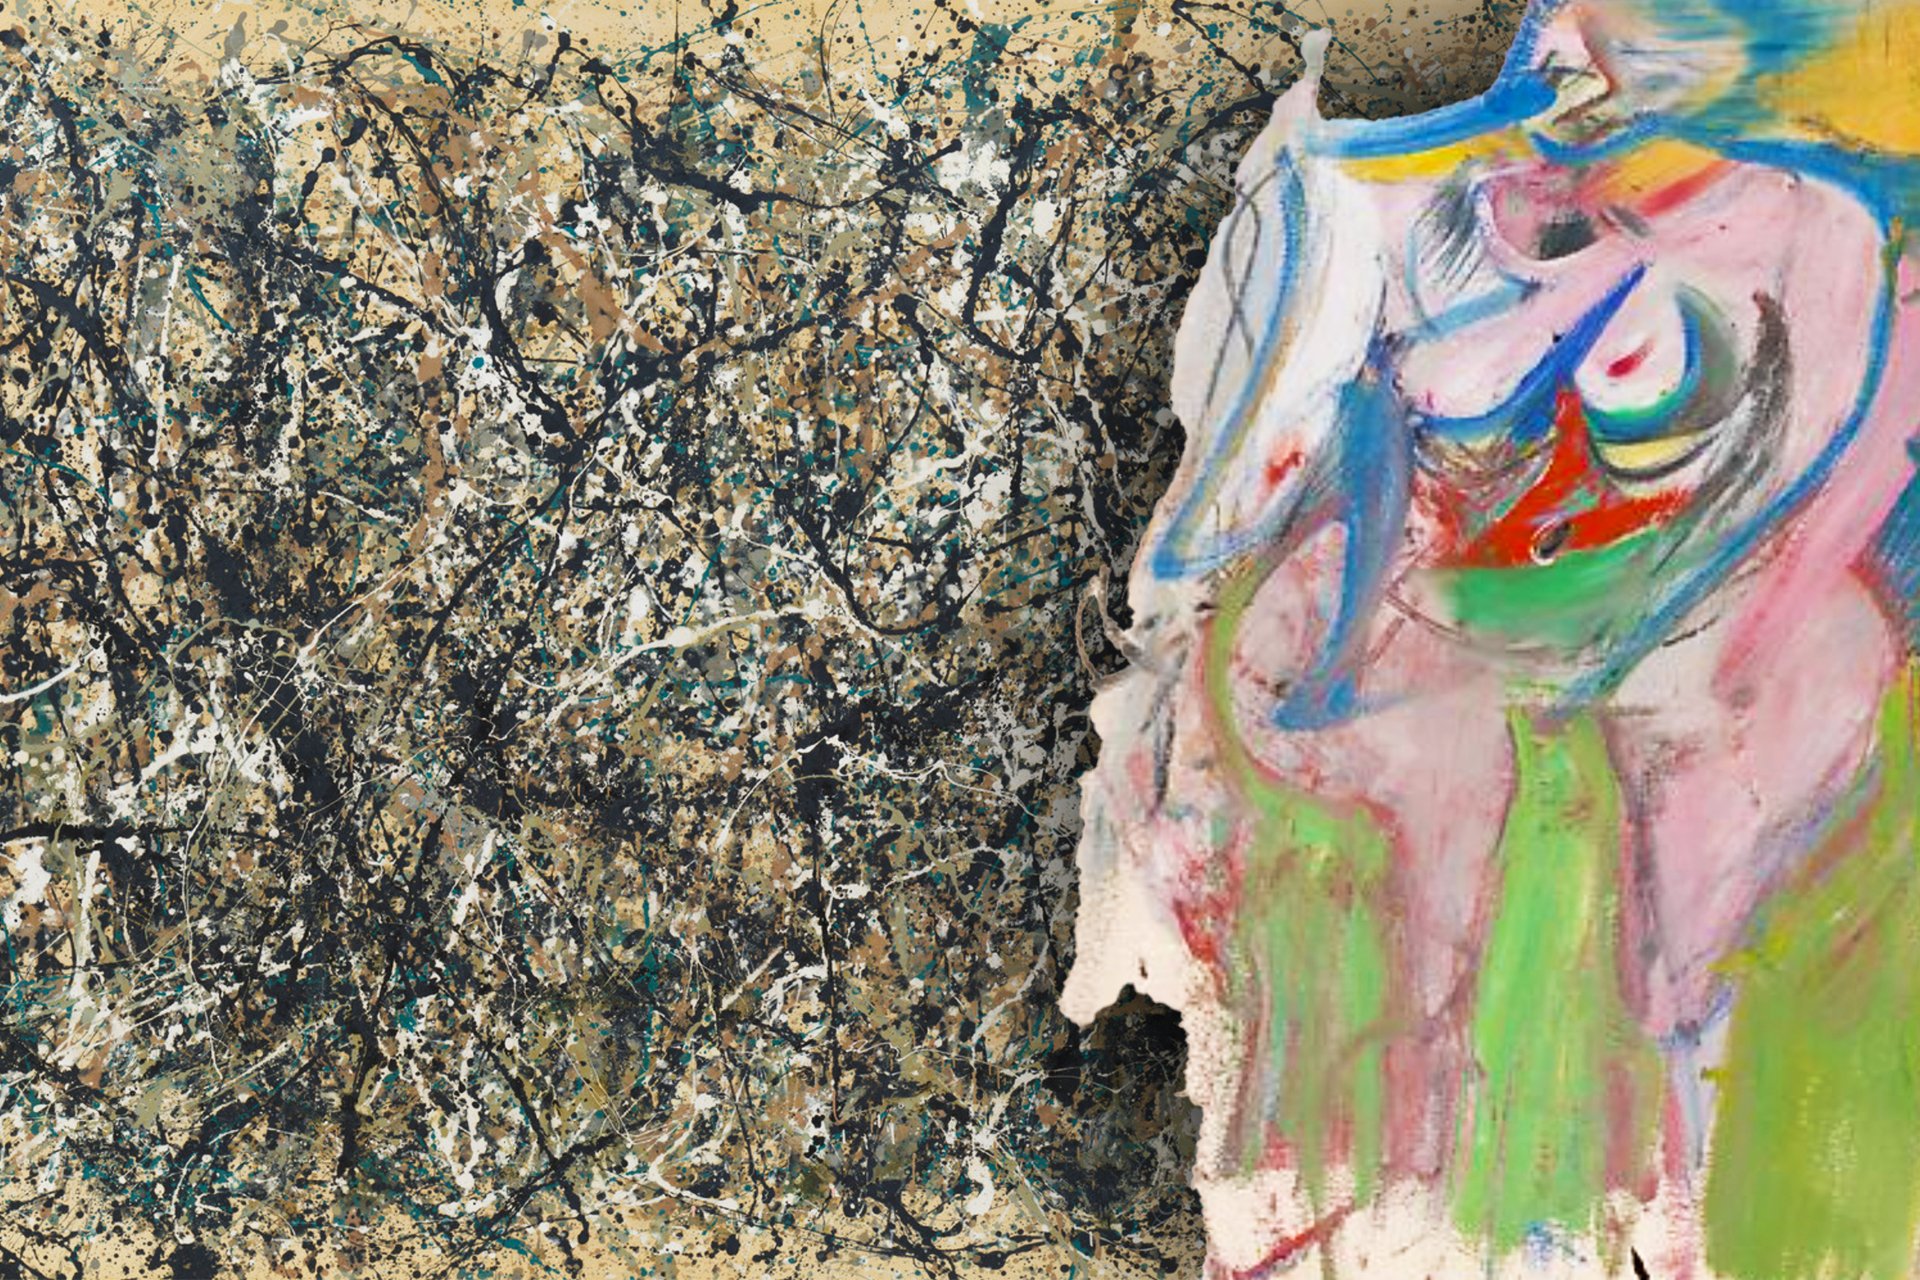 An abstract expressionism painting with a black and white splatter on the left and a colorful figure on the right.